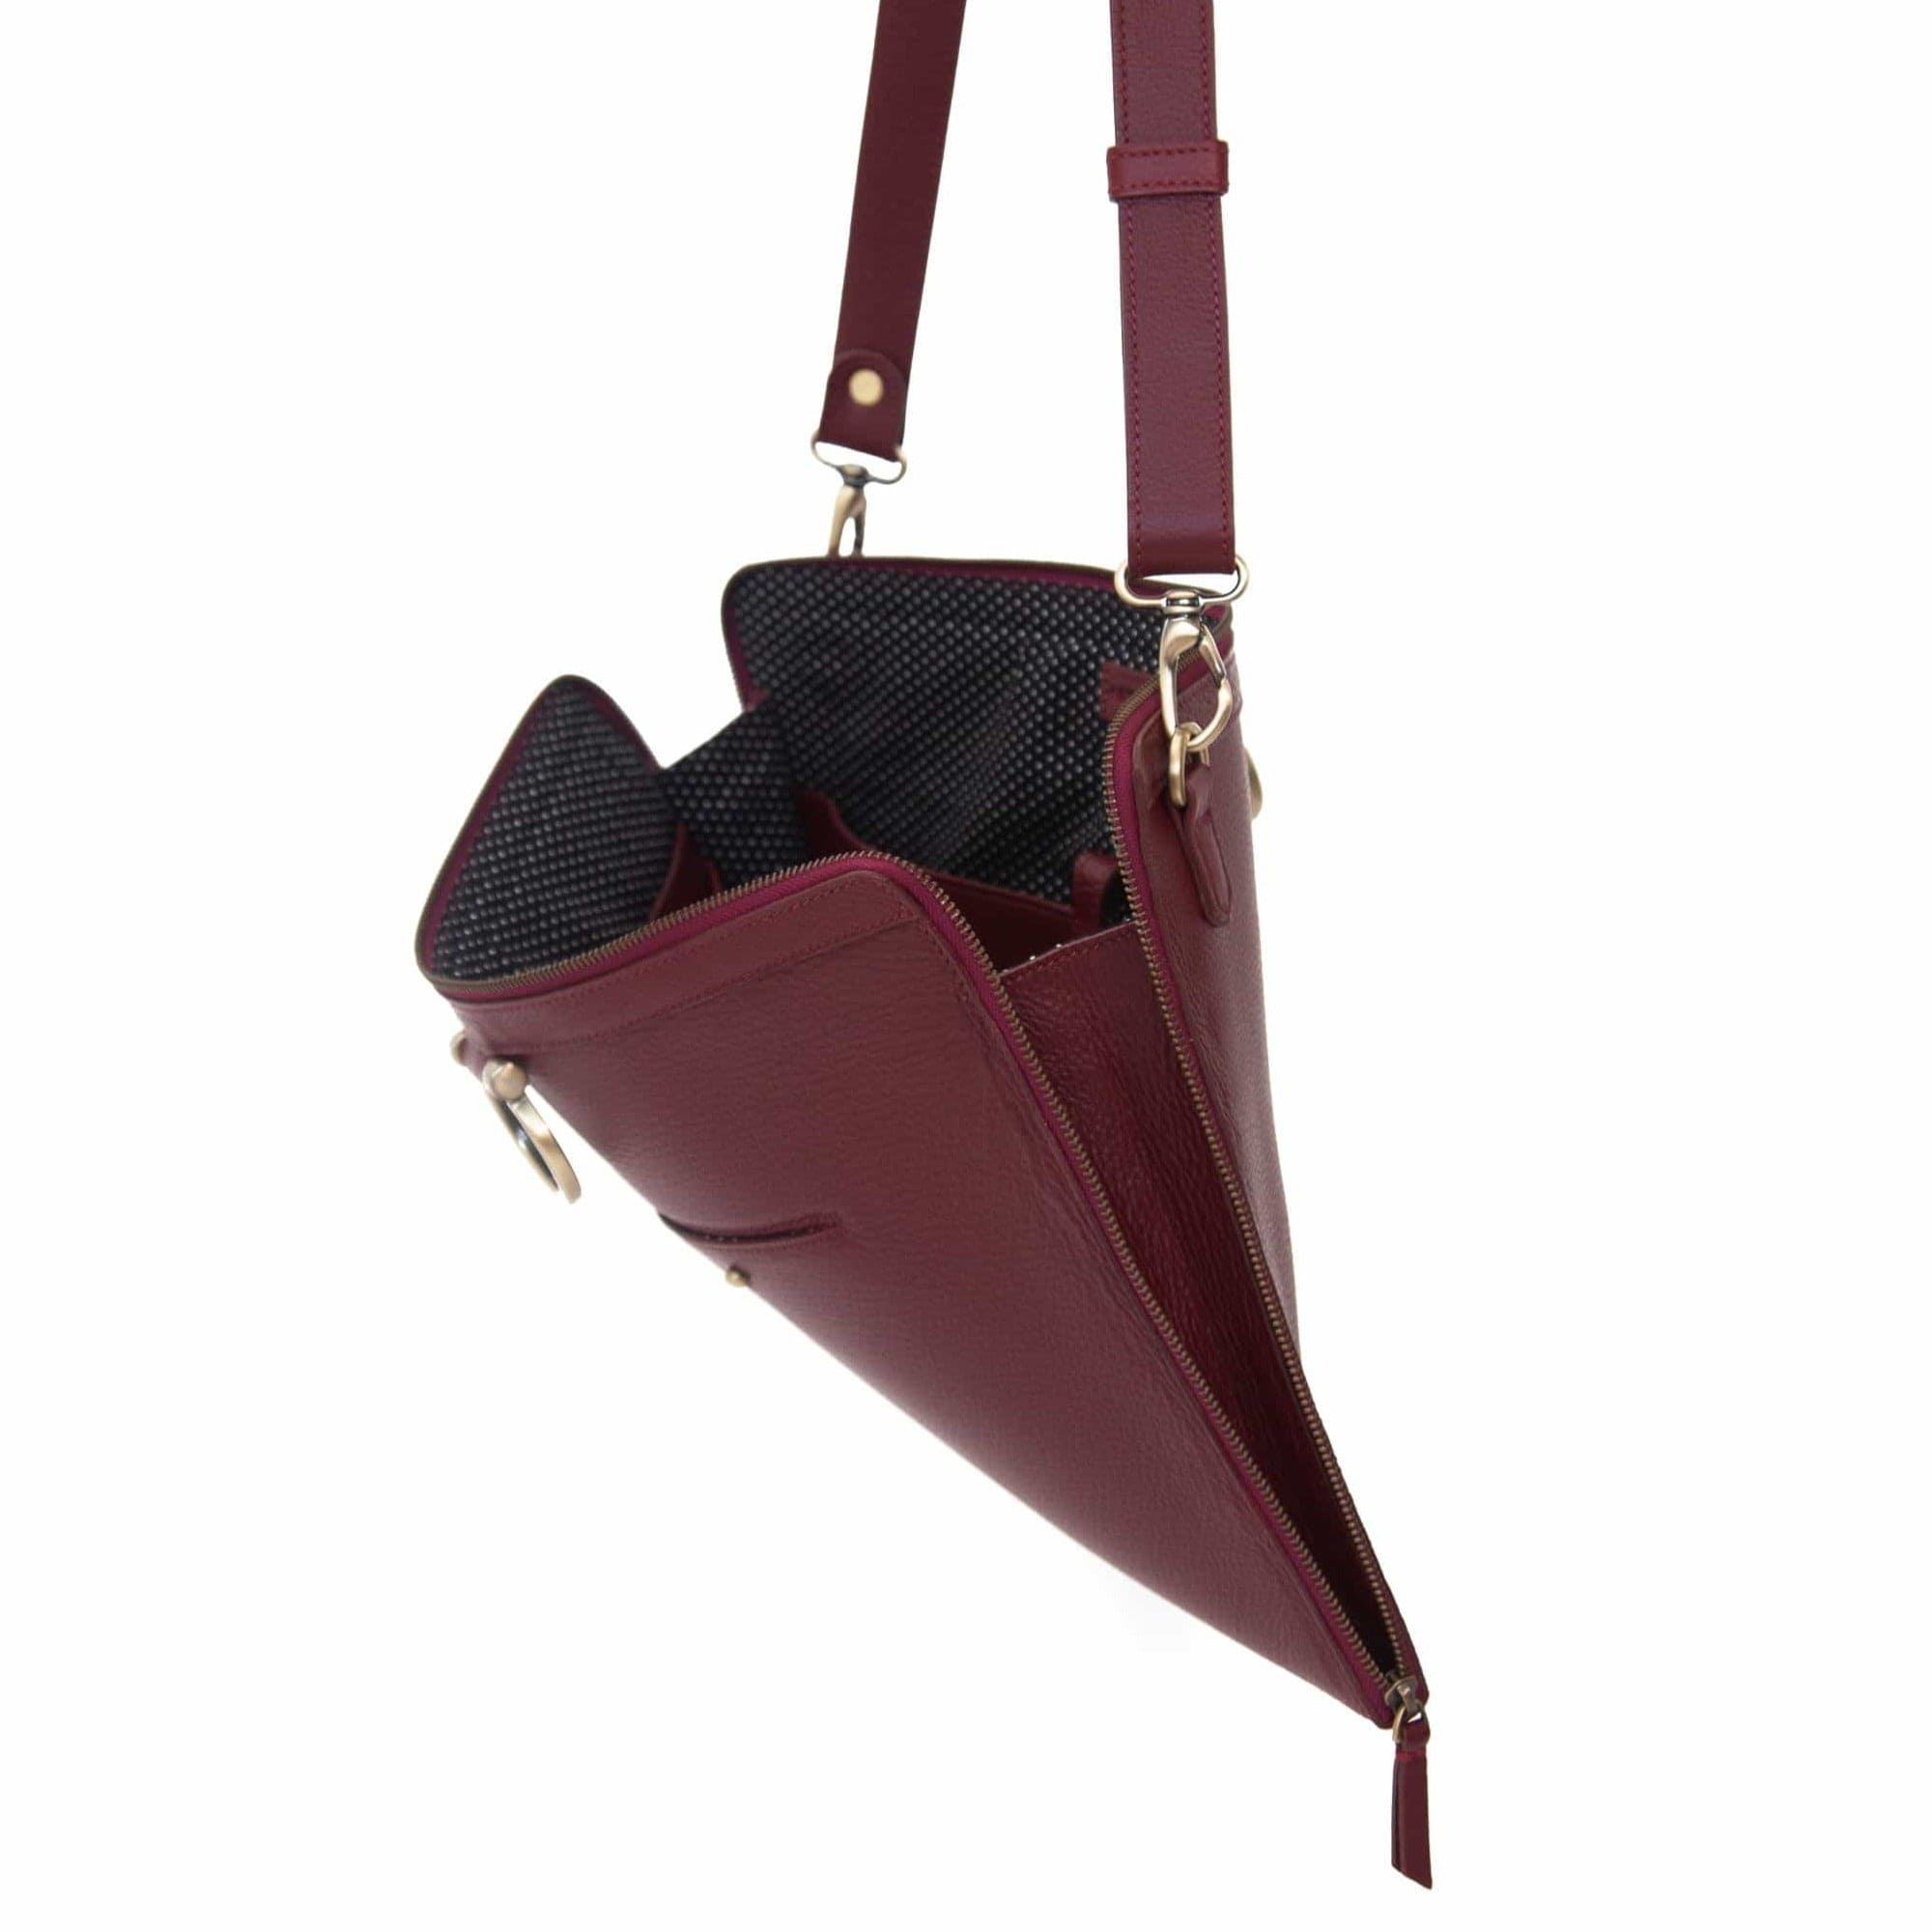 The M large crossbody bag in deep red oil leather zips all the way around for a sleek, minimalist look.